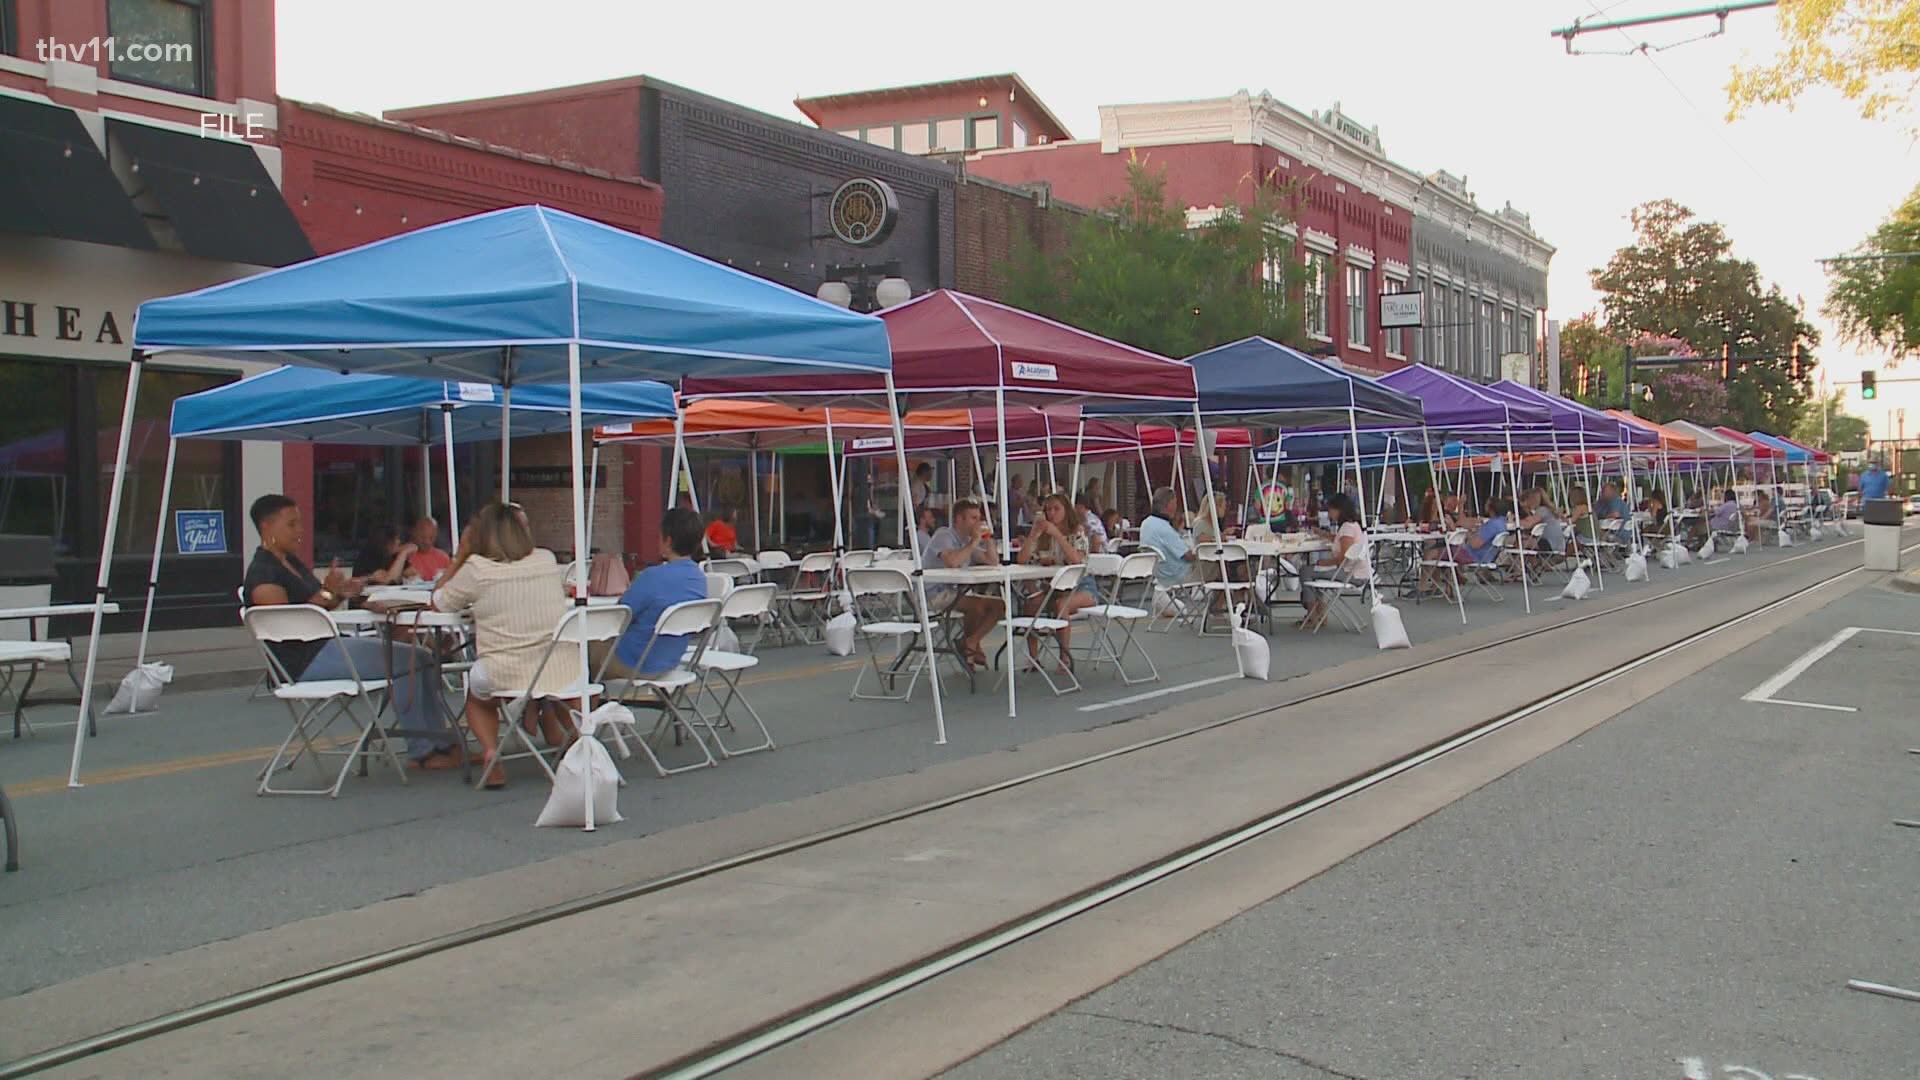 Outdoor dining returns to Argenta after a winter break. It's on Main Street in North Little Rock between Broadway and 5th Street.